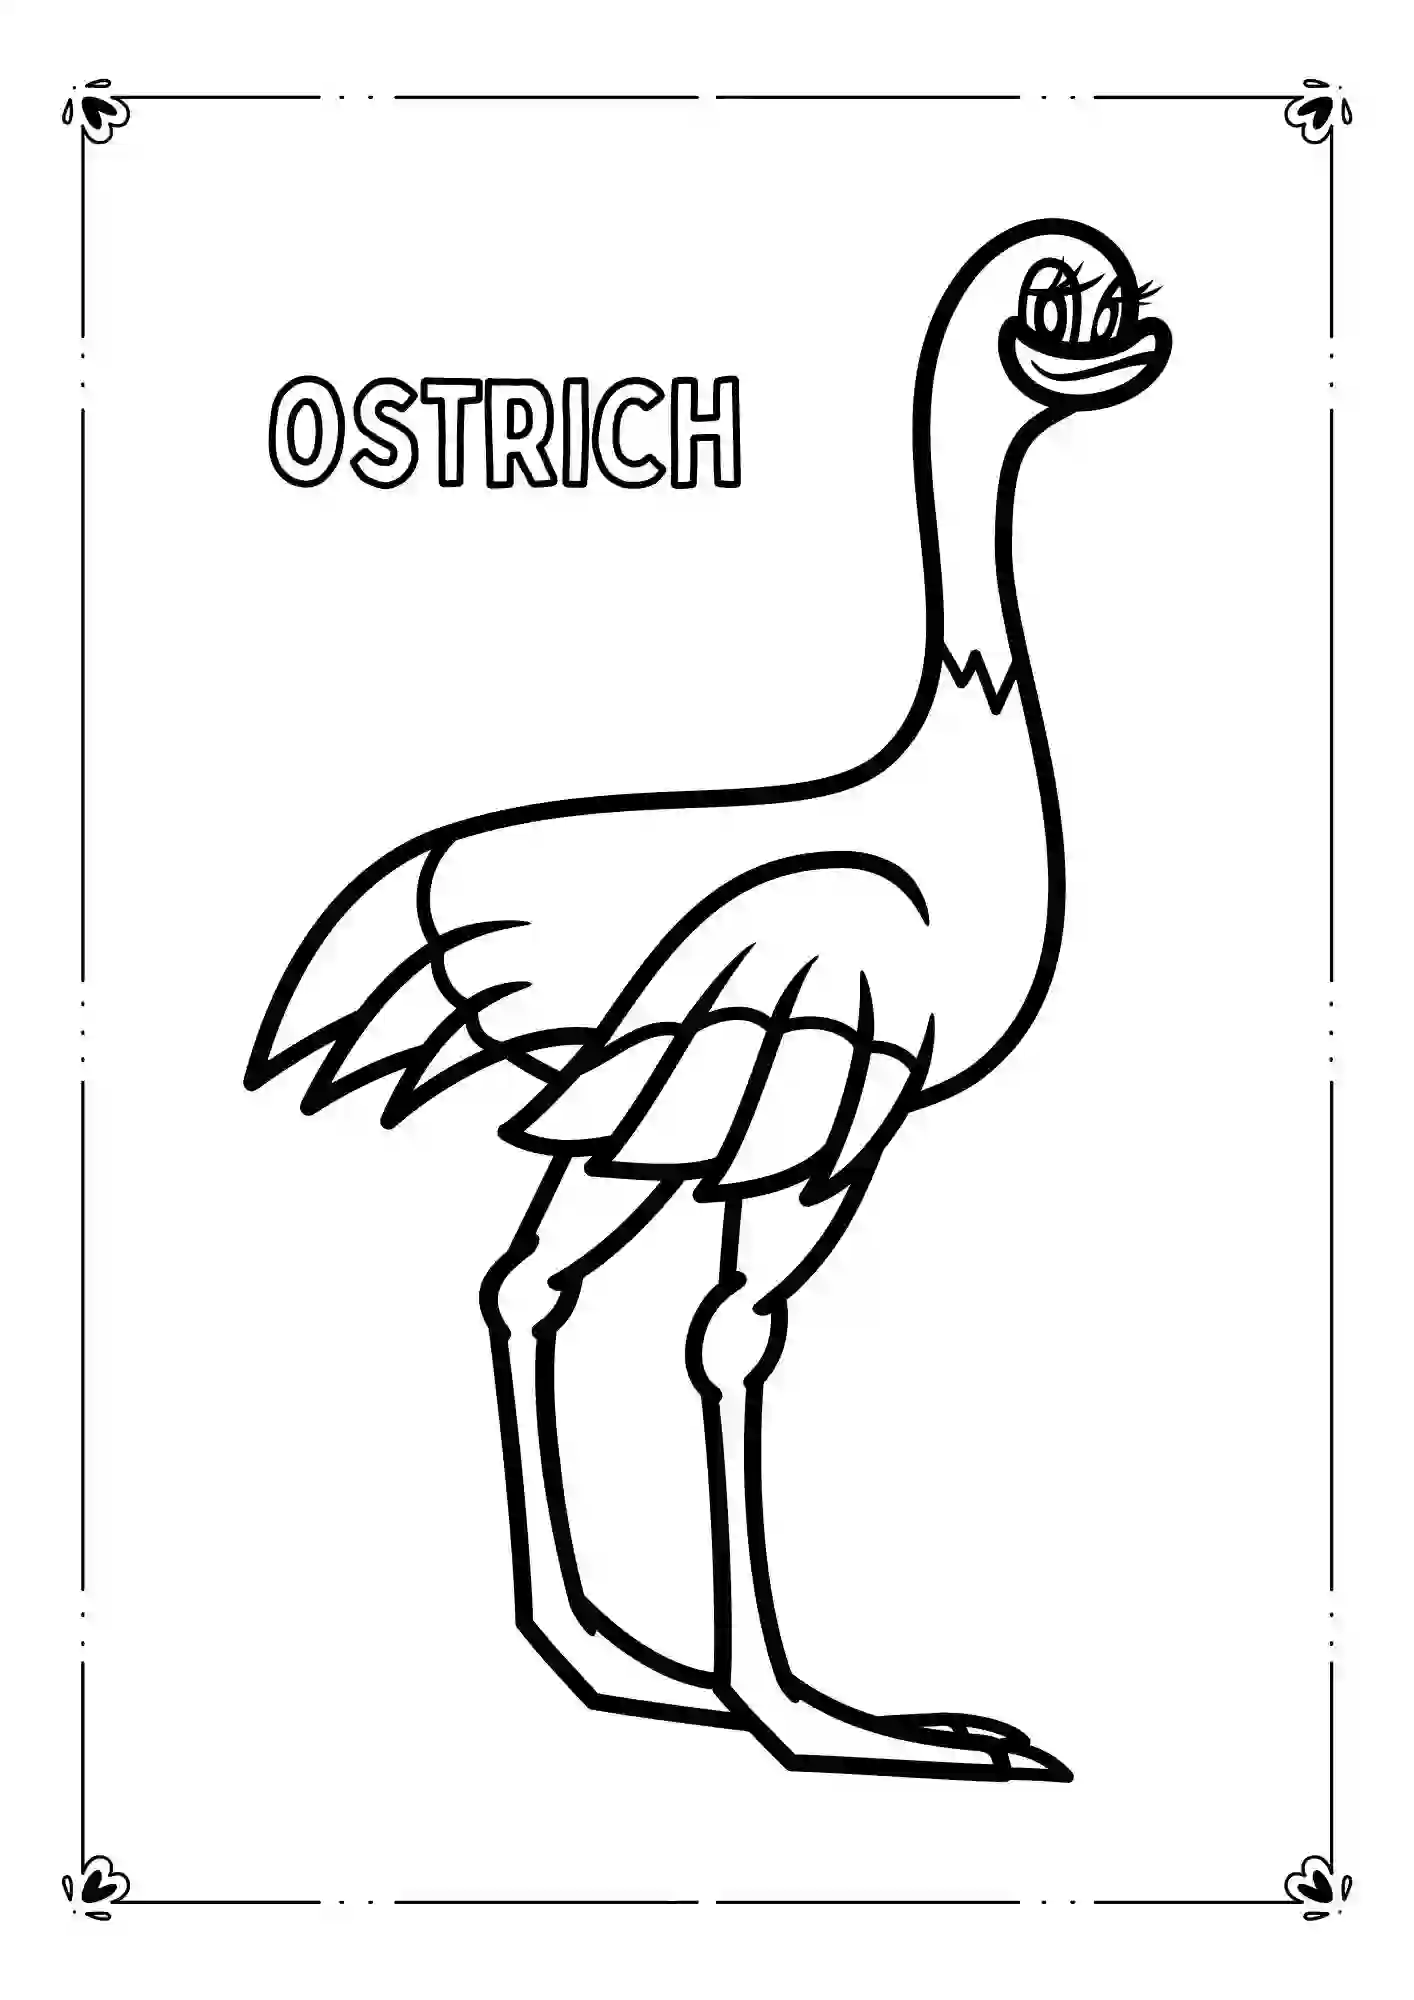 Farm Animals Coloring Worksheets (OSTRICH)